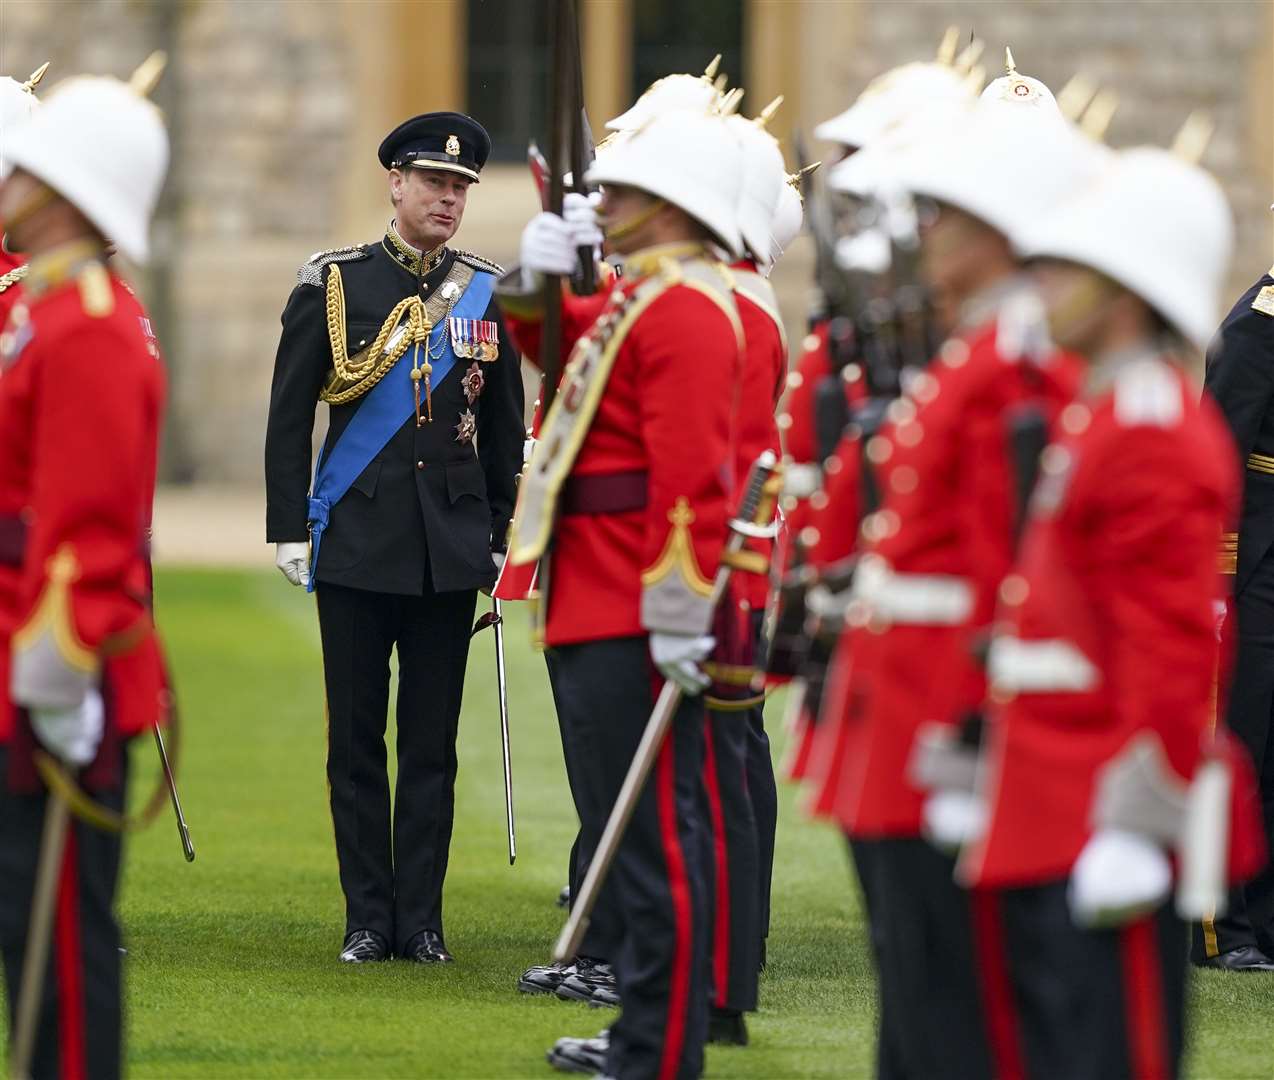 The Earl of Wessex presenting new colours to the Royal Gibraltar Regiment during a ceremony at Windsor Castle (Steve Parsons/PA)